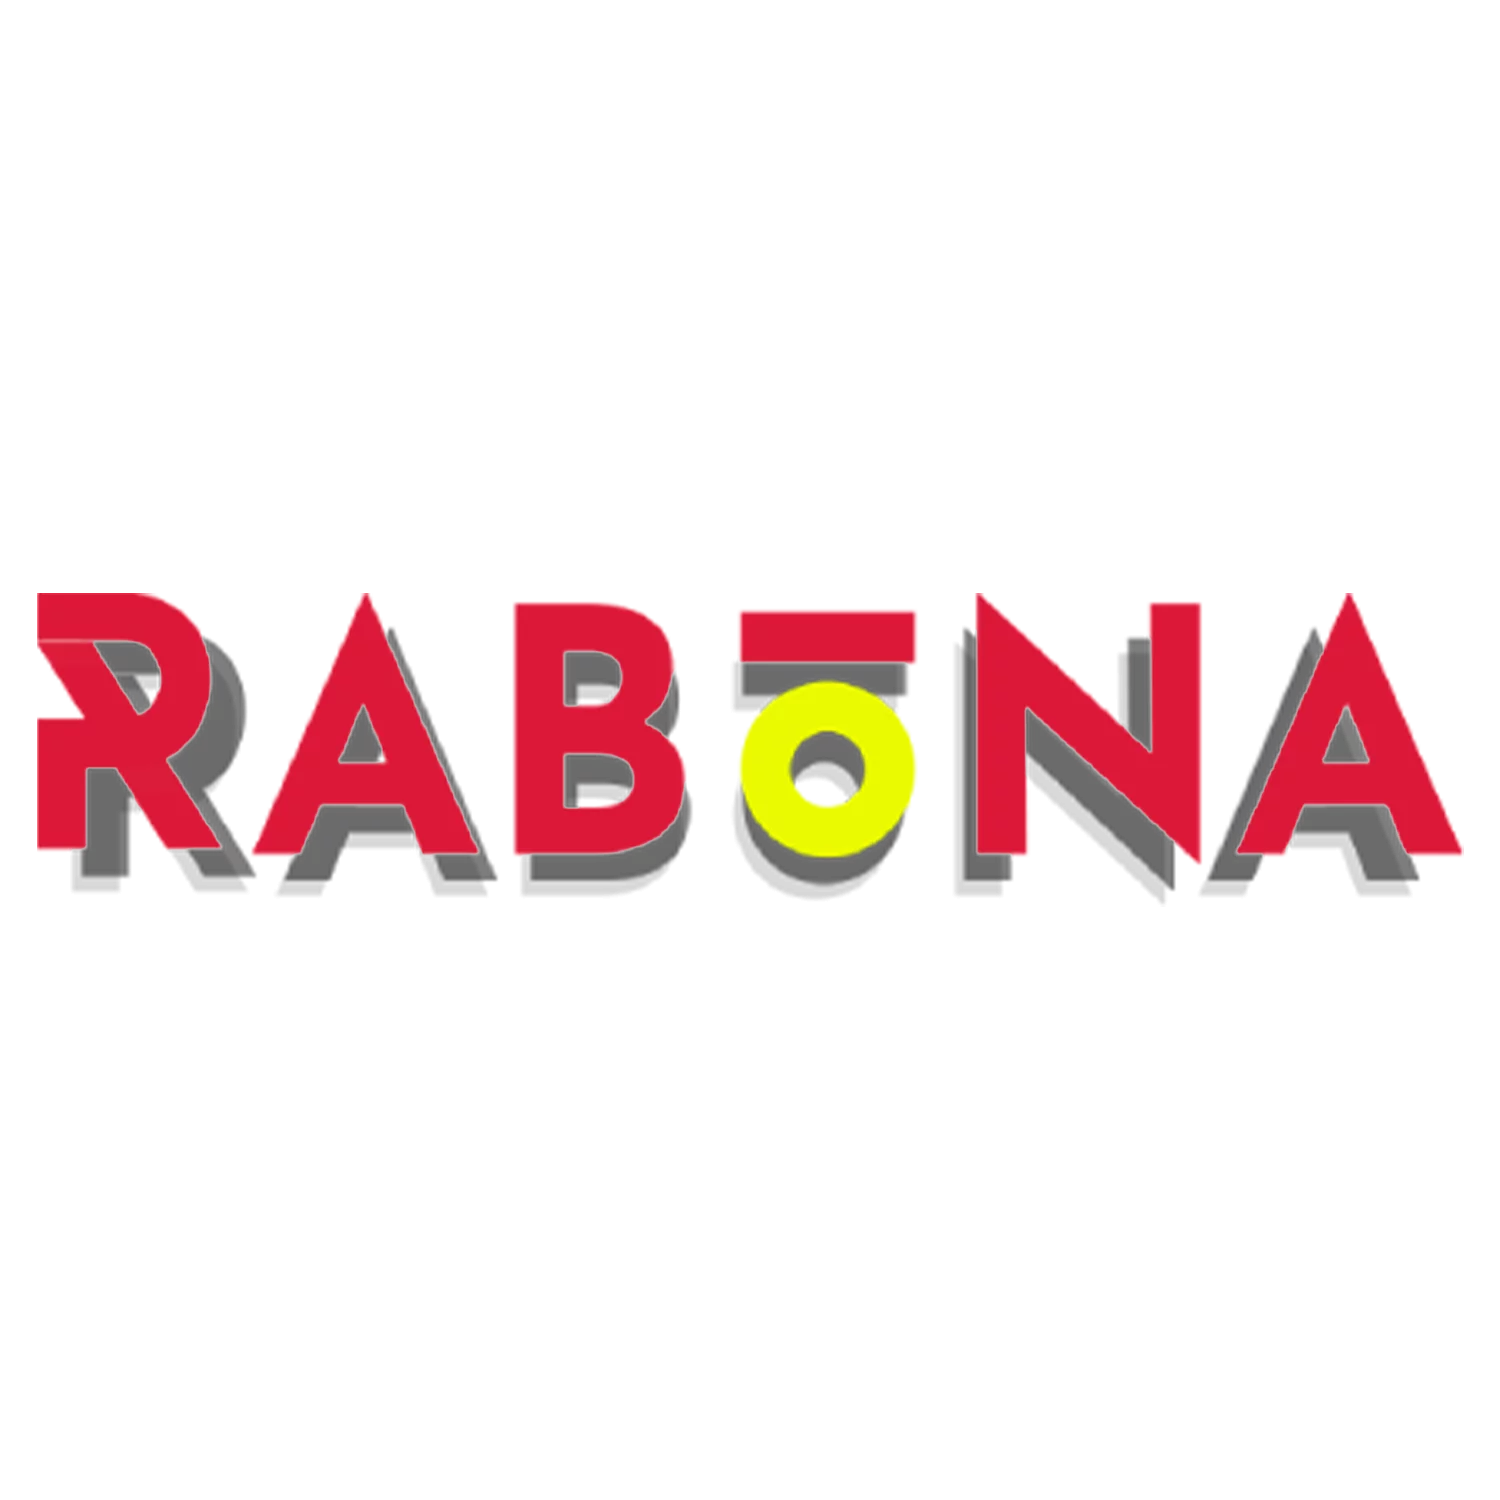 Rabona is secure well-developing young betting site in Bangladesh.